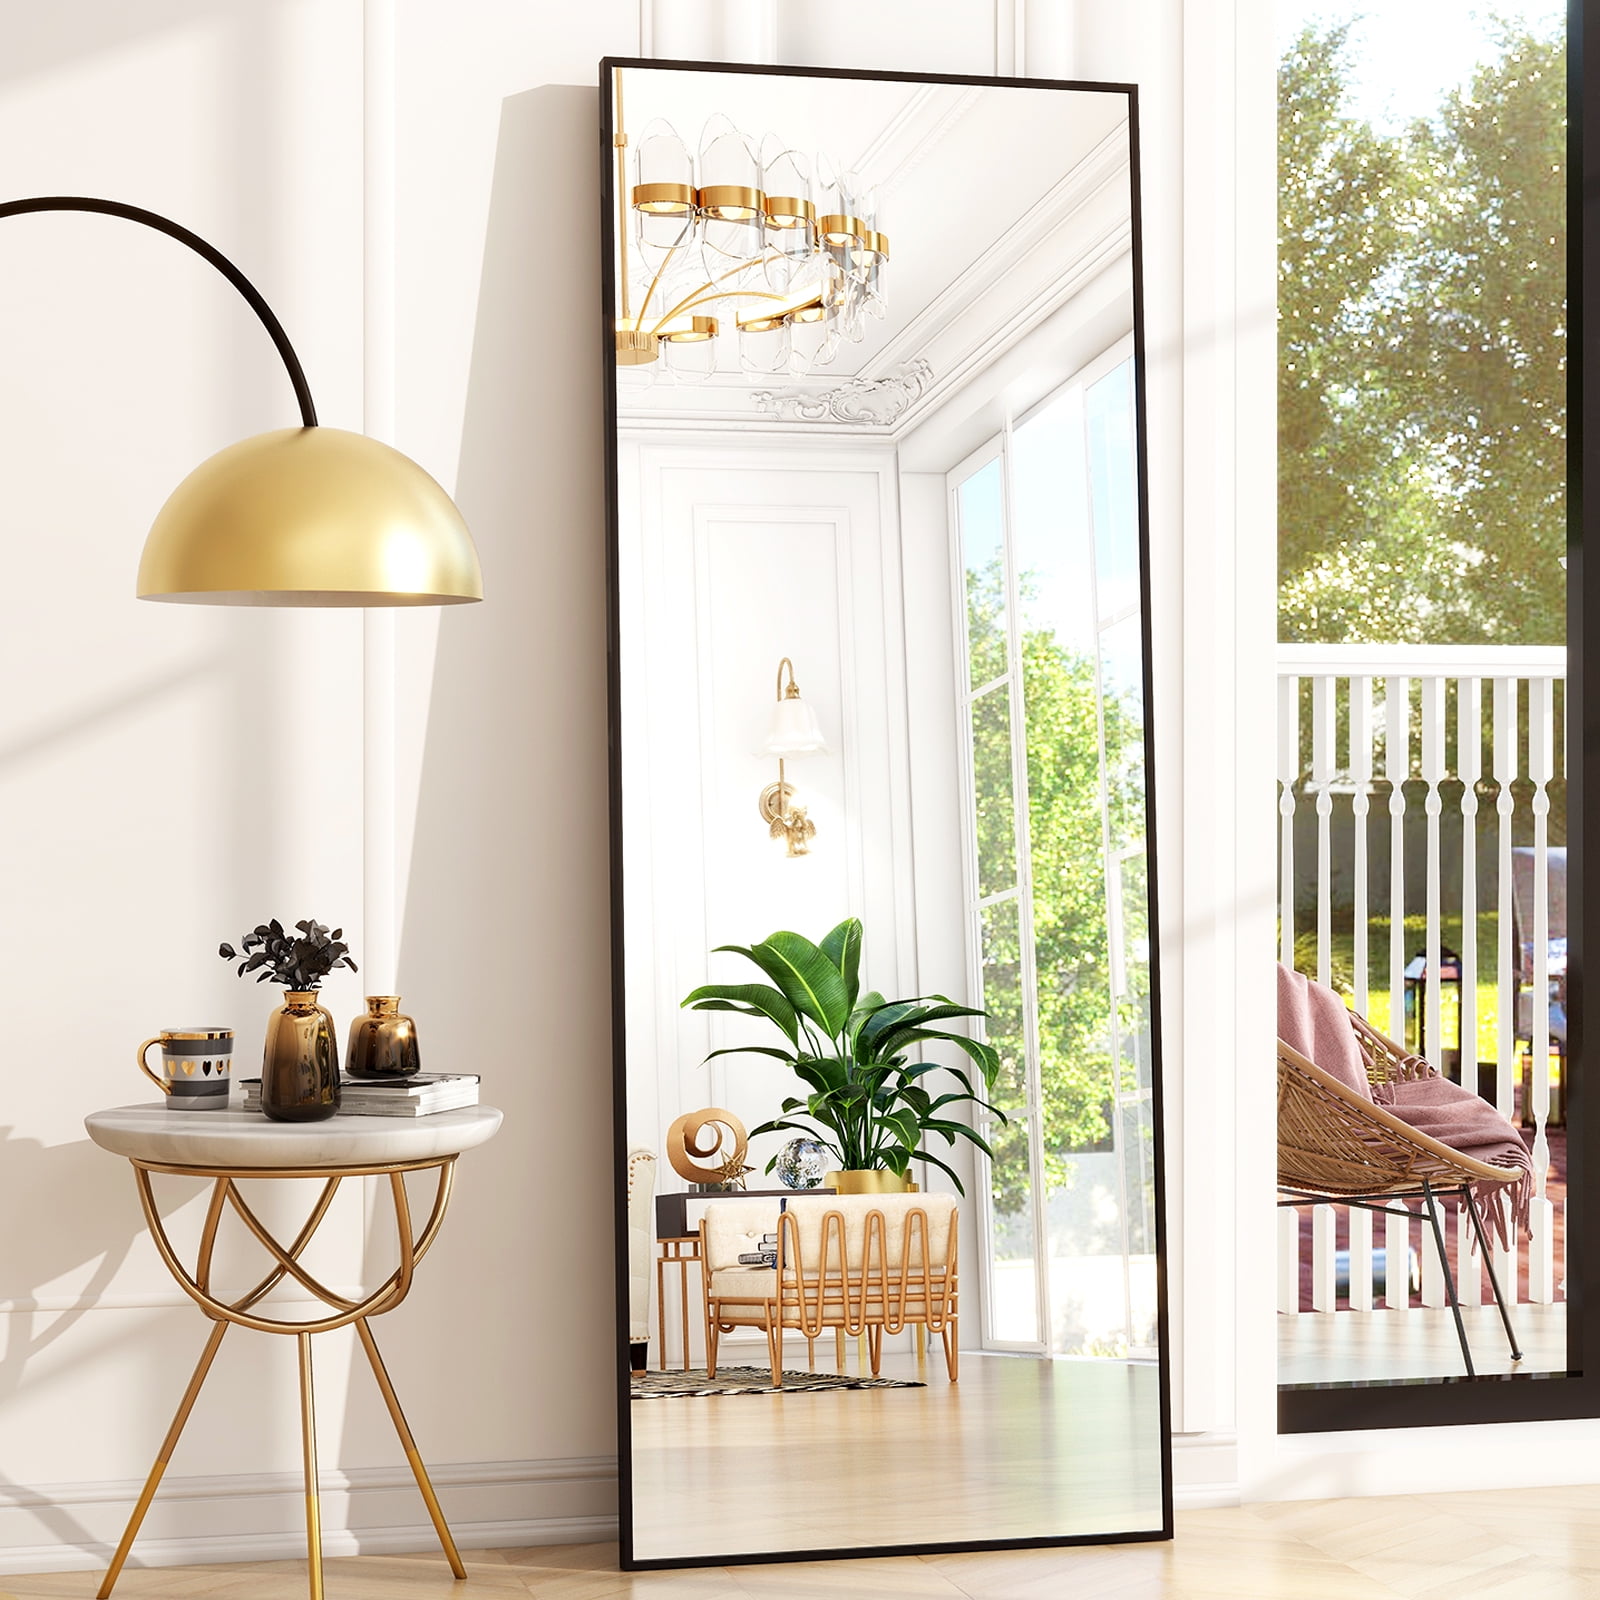 Neutype 65 inch x 22 inch Solid Wood Full Length Mirror with Standing Holder Floor Mirror Rectangular Wall Mounted Mirror Hanging Leaning, White, Size